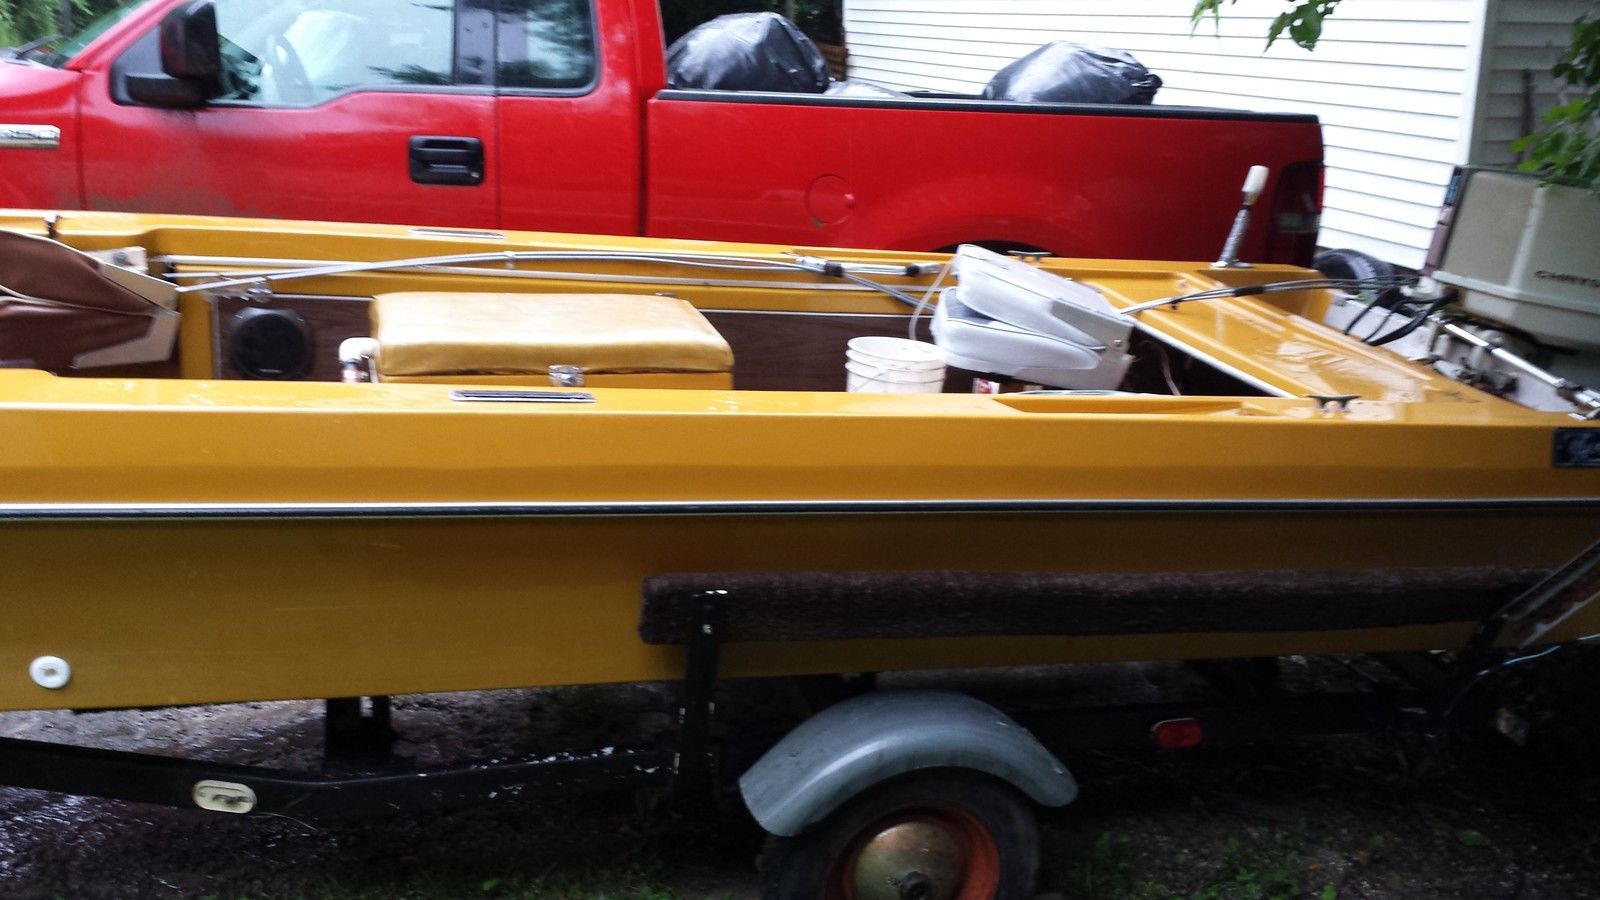 Terry Bass Boat Fishing 1975 for sale for $500 - Boats-from-USA.com